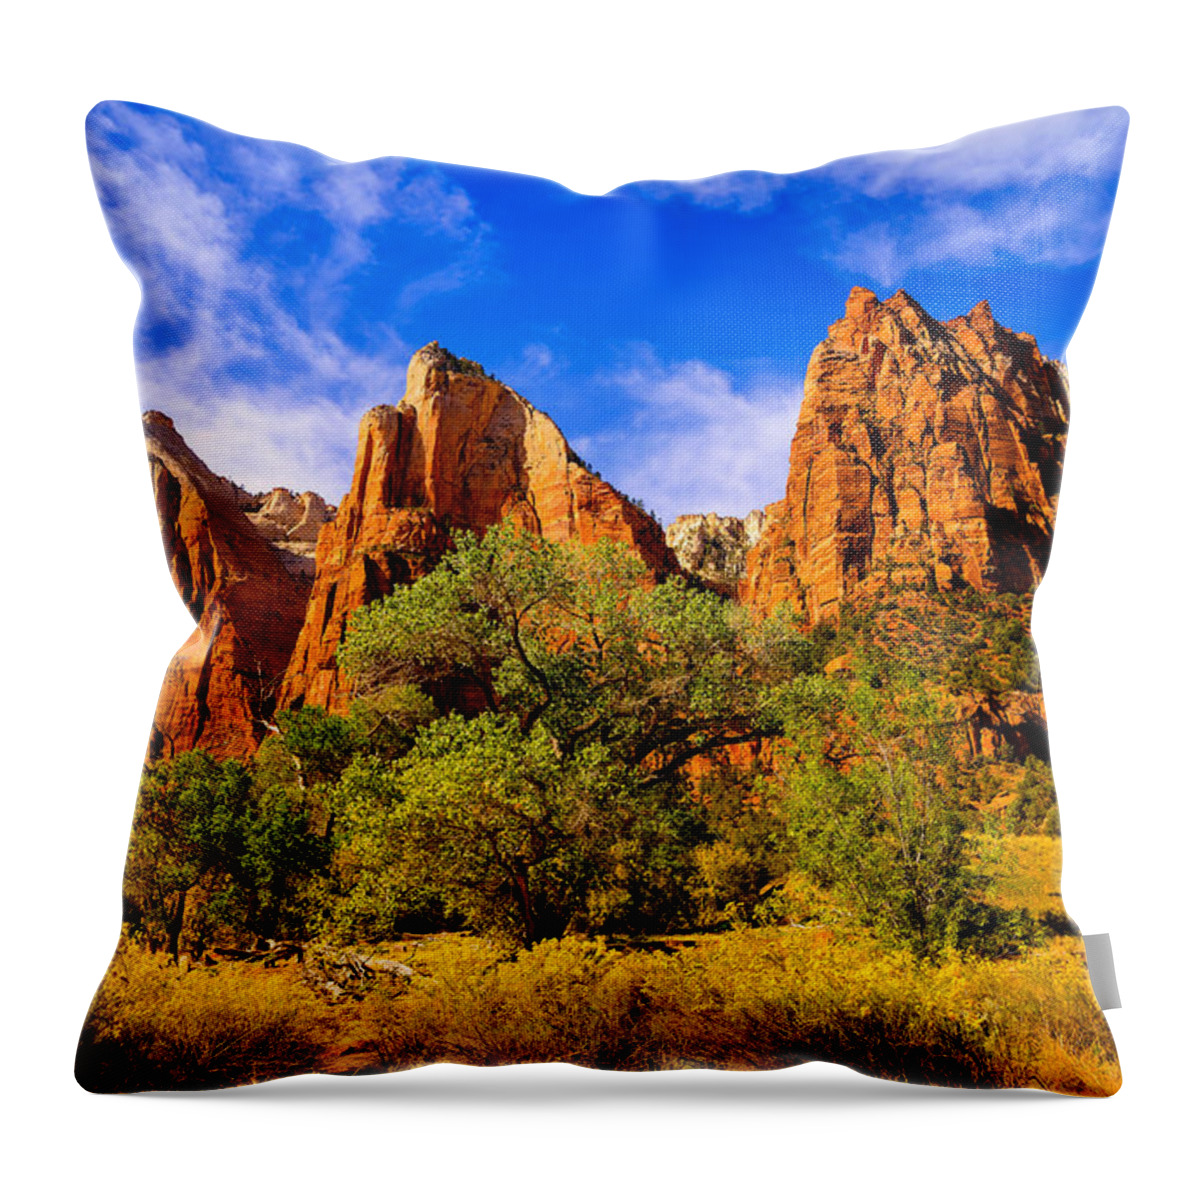 Court Of The Patriarchs Throw Pillow featuring the photograph Court of the Patriarchs by Greg Norrell